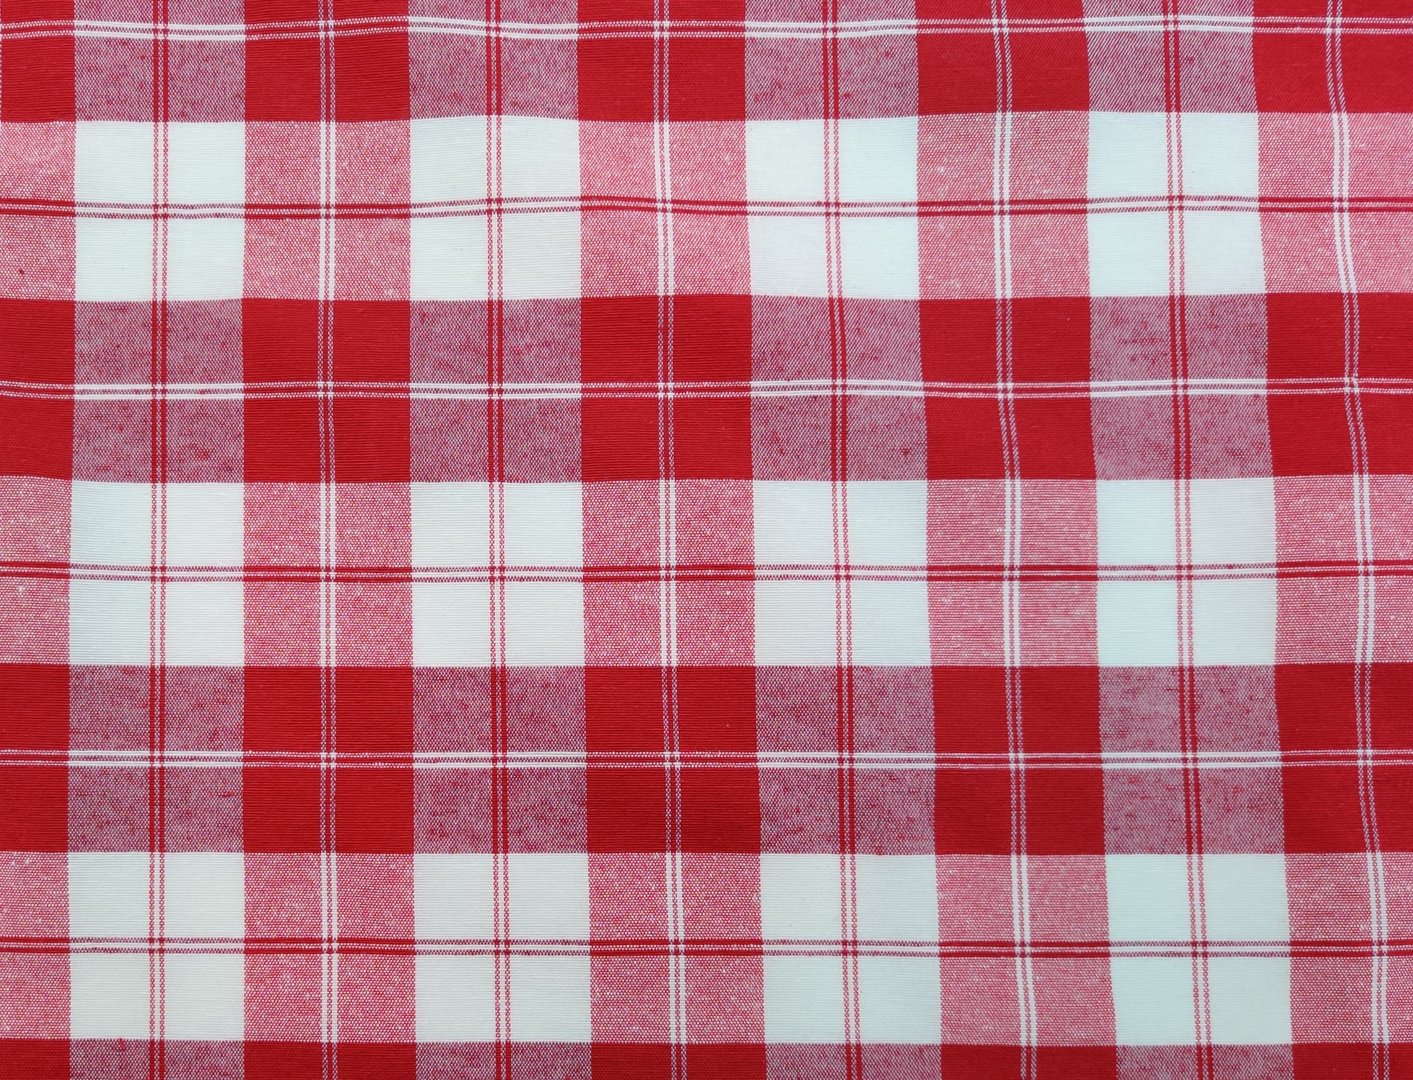 Red checkered fabric